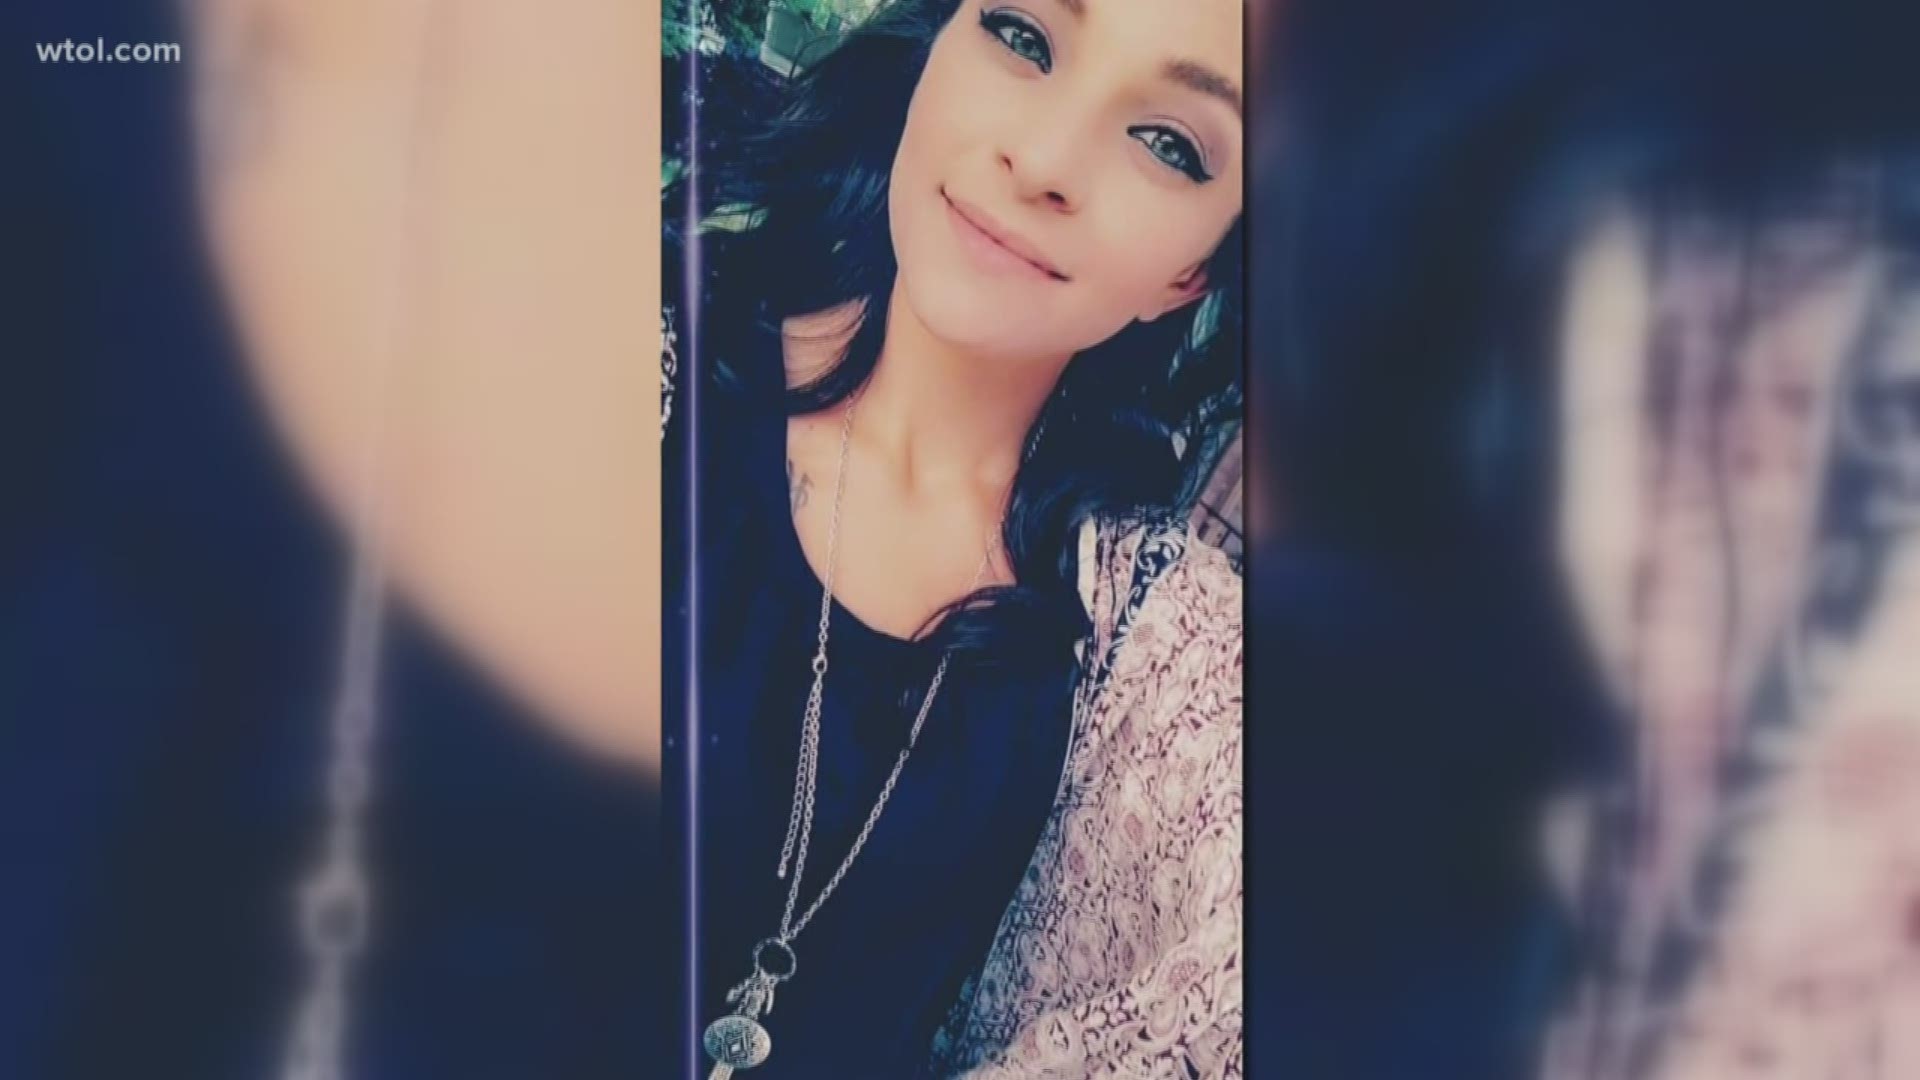 Just days after 28-year-old Danialle Swan was brutally stabbed at a gas station in west Toledo, her father and uncle speak exclusively to WTOL 11 about her life.